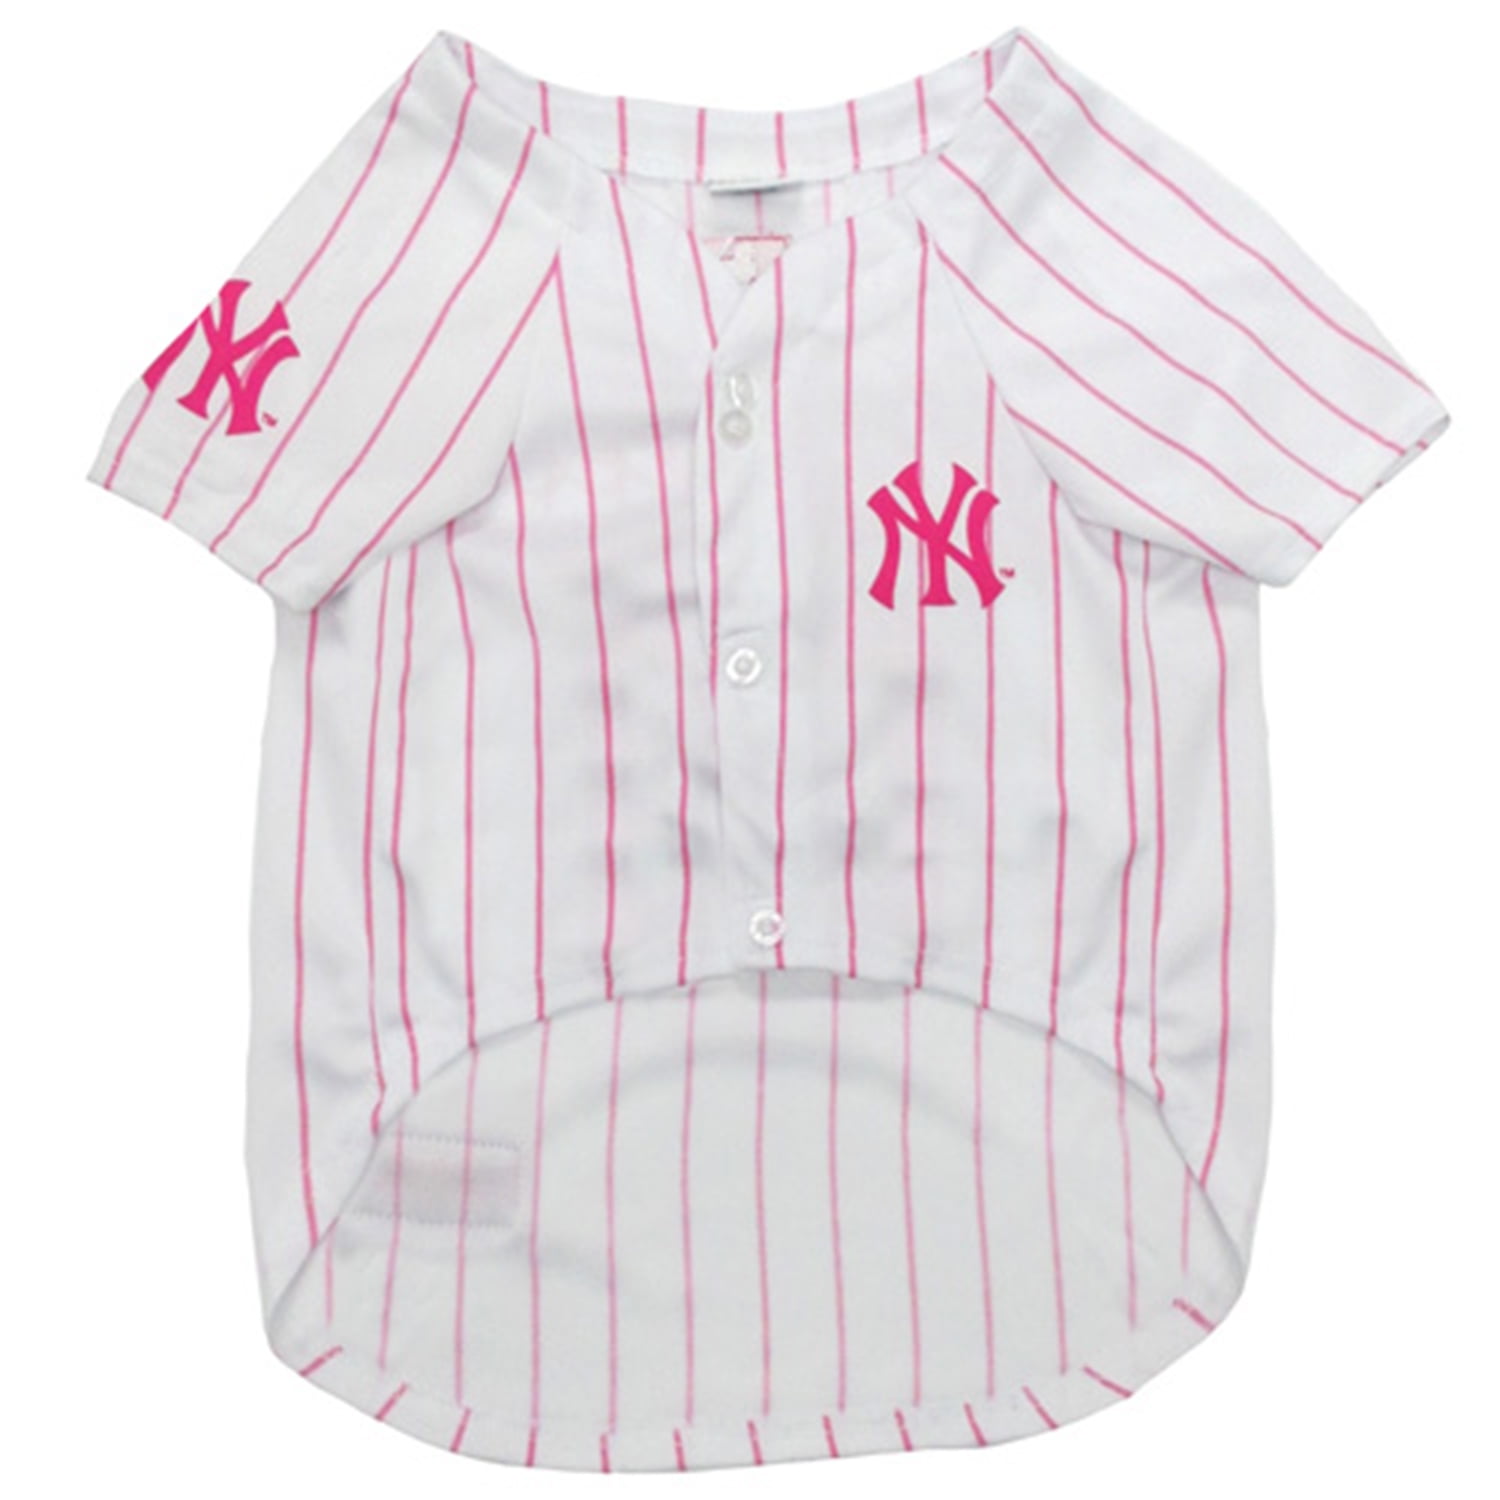 Pets First MLB Houston Astros Baseball Pink Jersey - Licensed MLB Jersey -  Large 